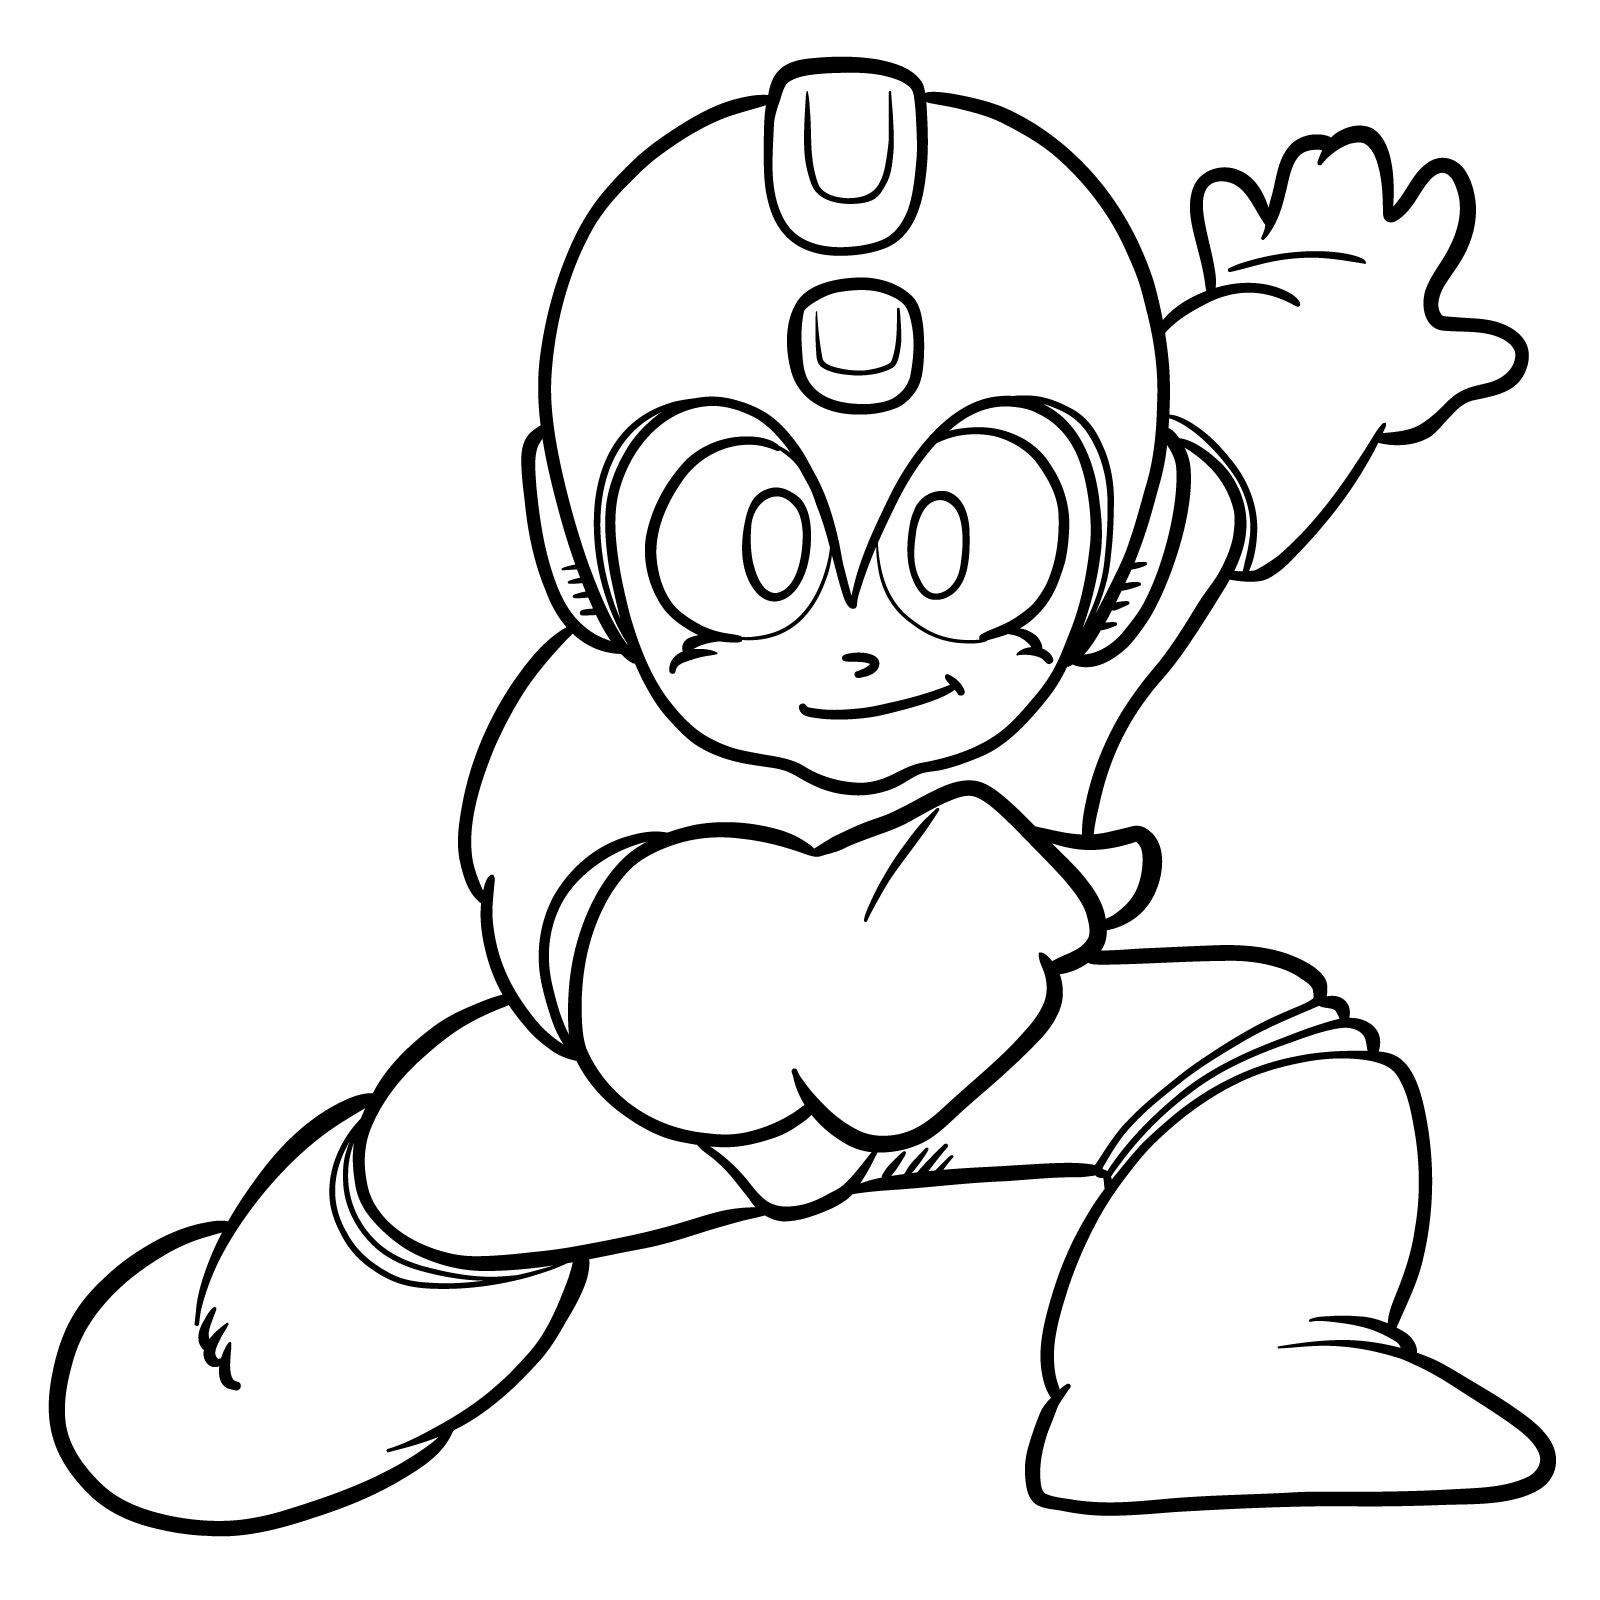 How to draw Mega Man from the original game - final step